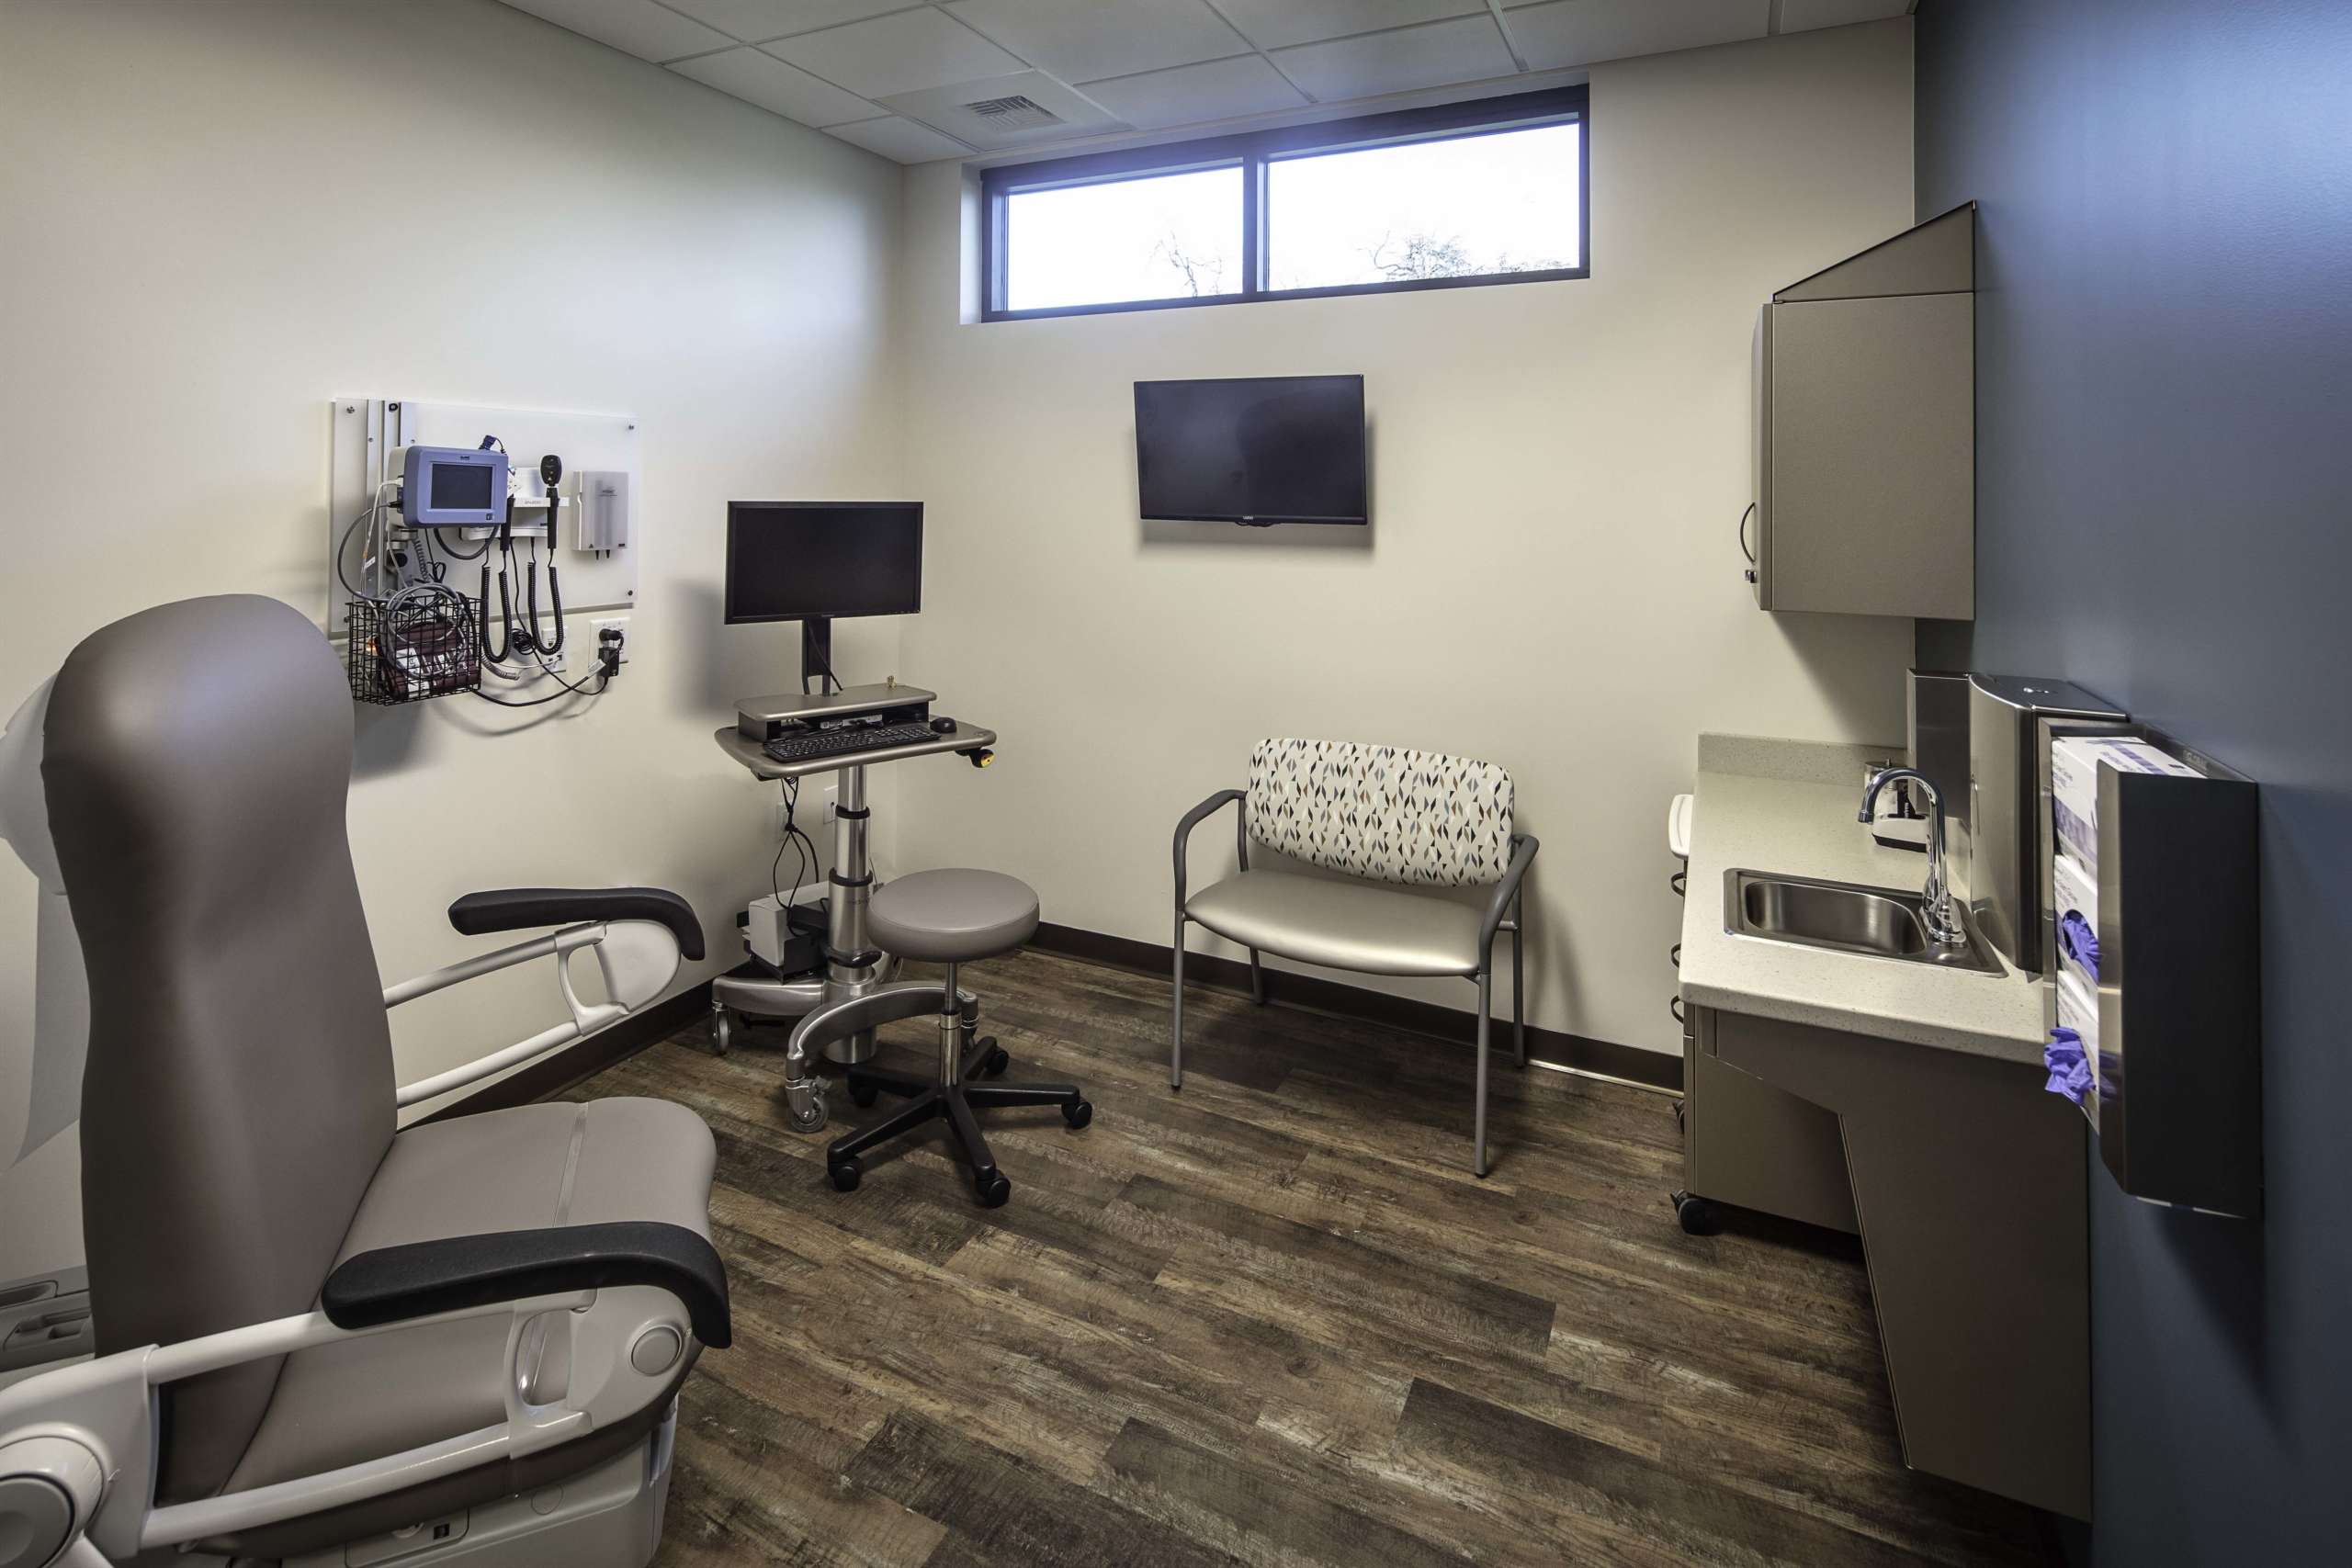 Patient exam room at the Winters Healthcare Community Health Center